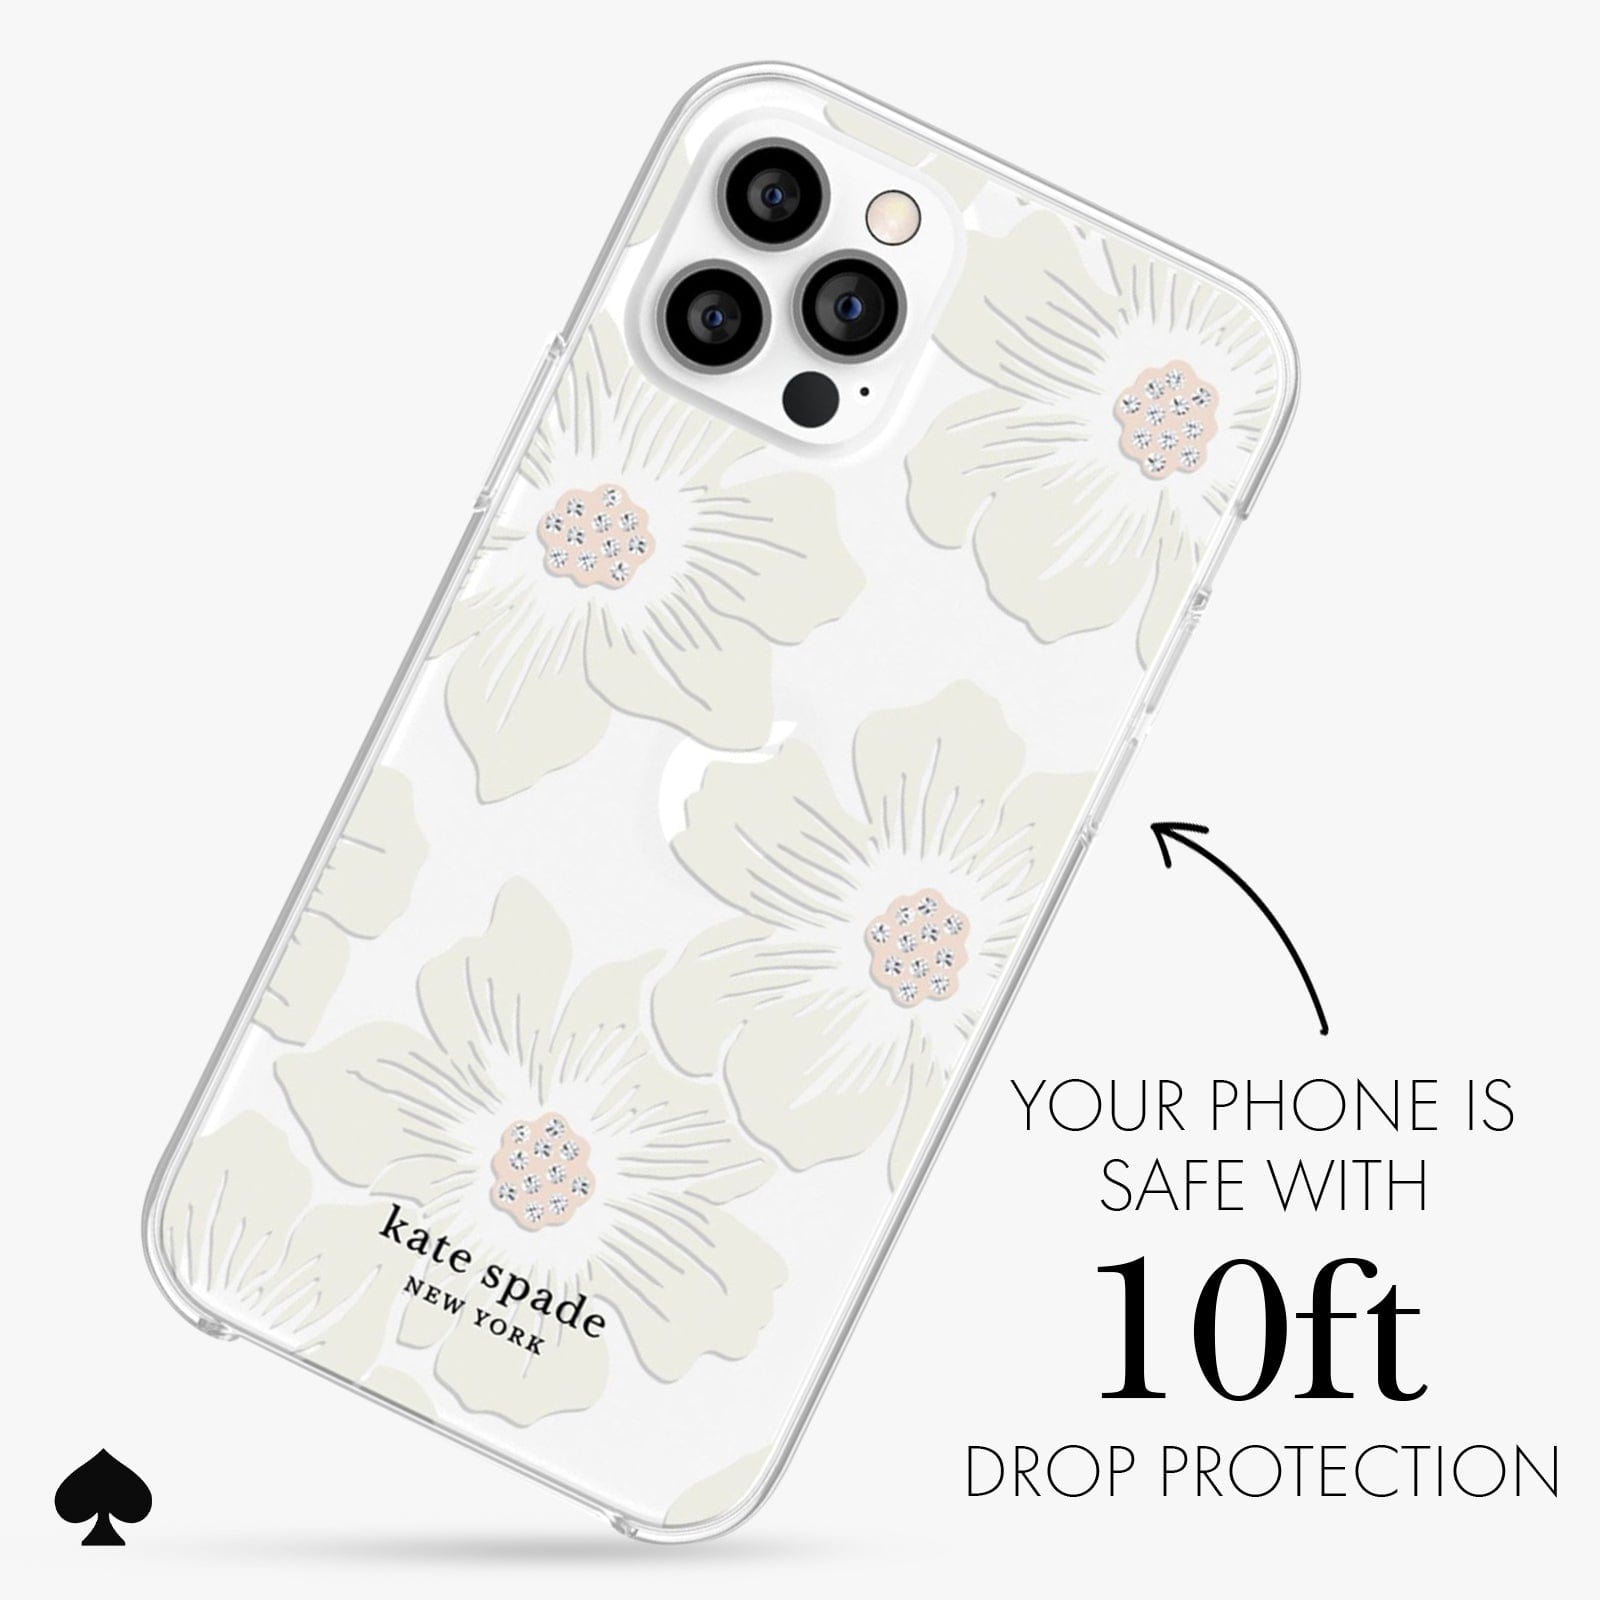 YOUR PHONE IS SAFE WITH 10FT DROP PROTECTION